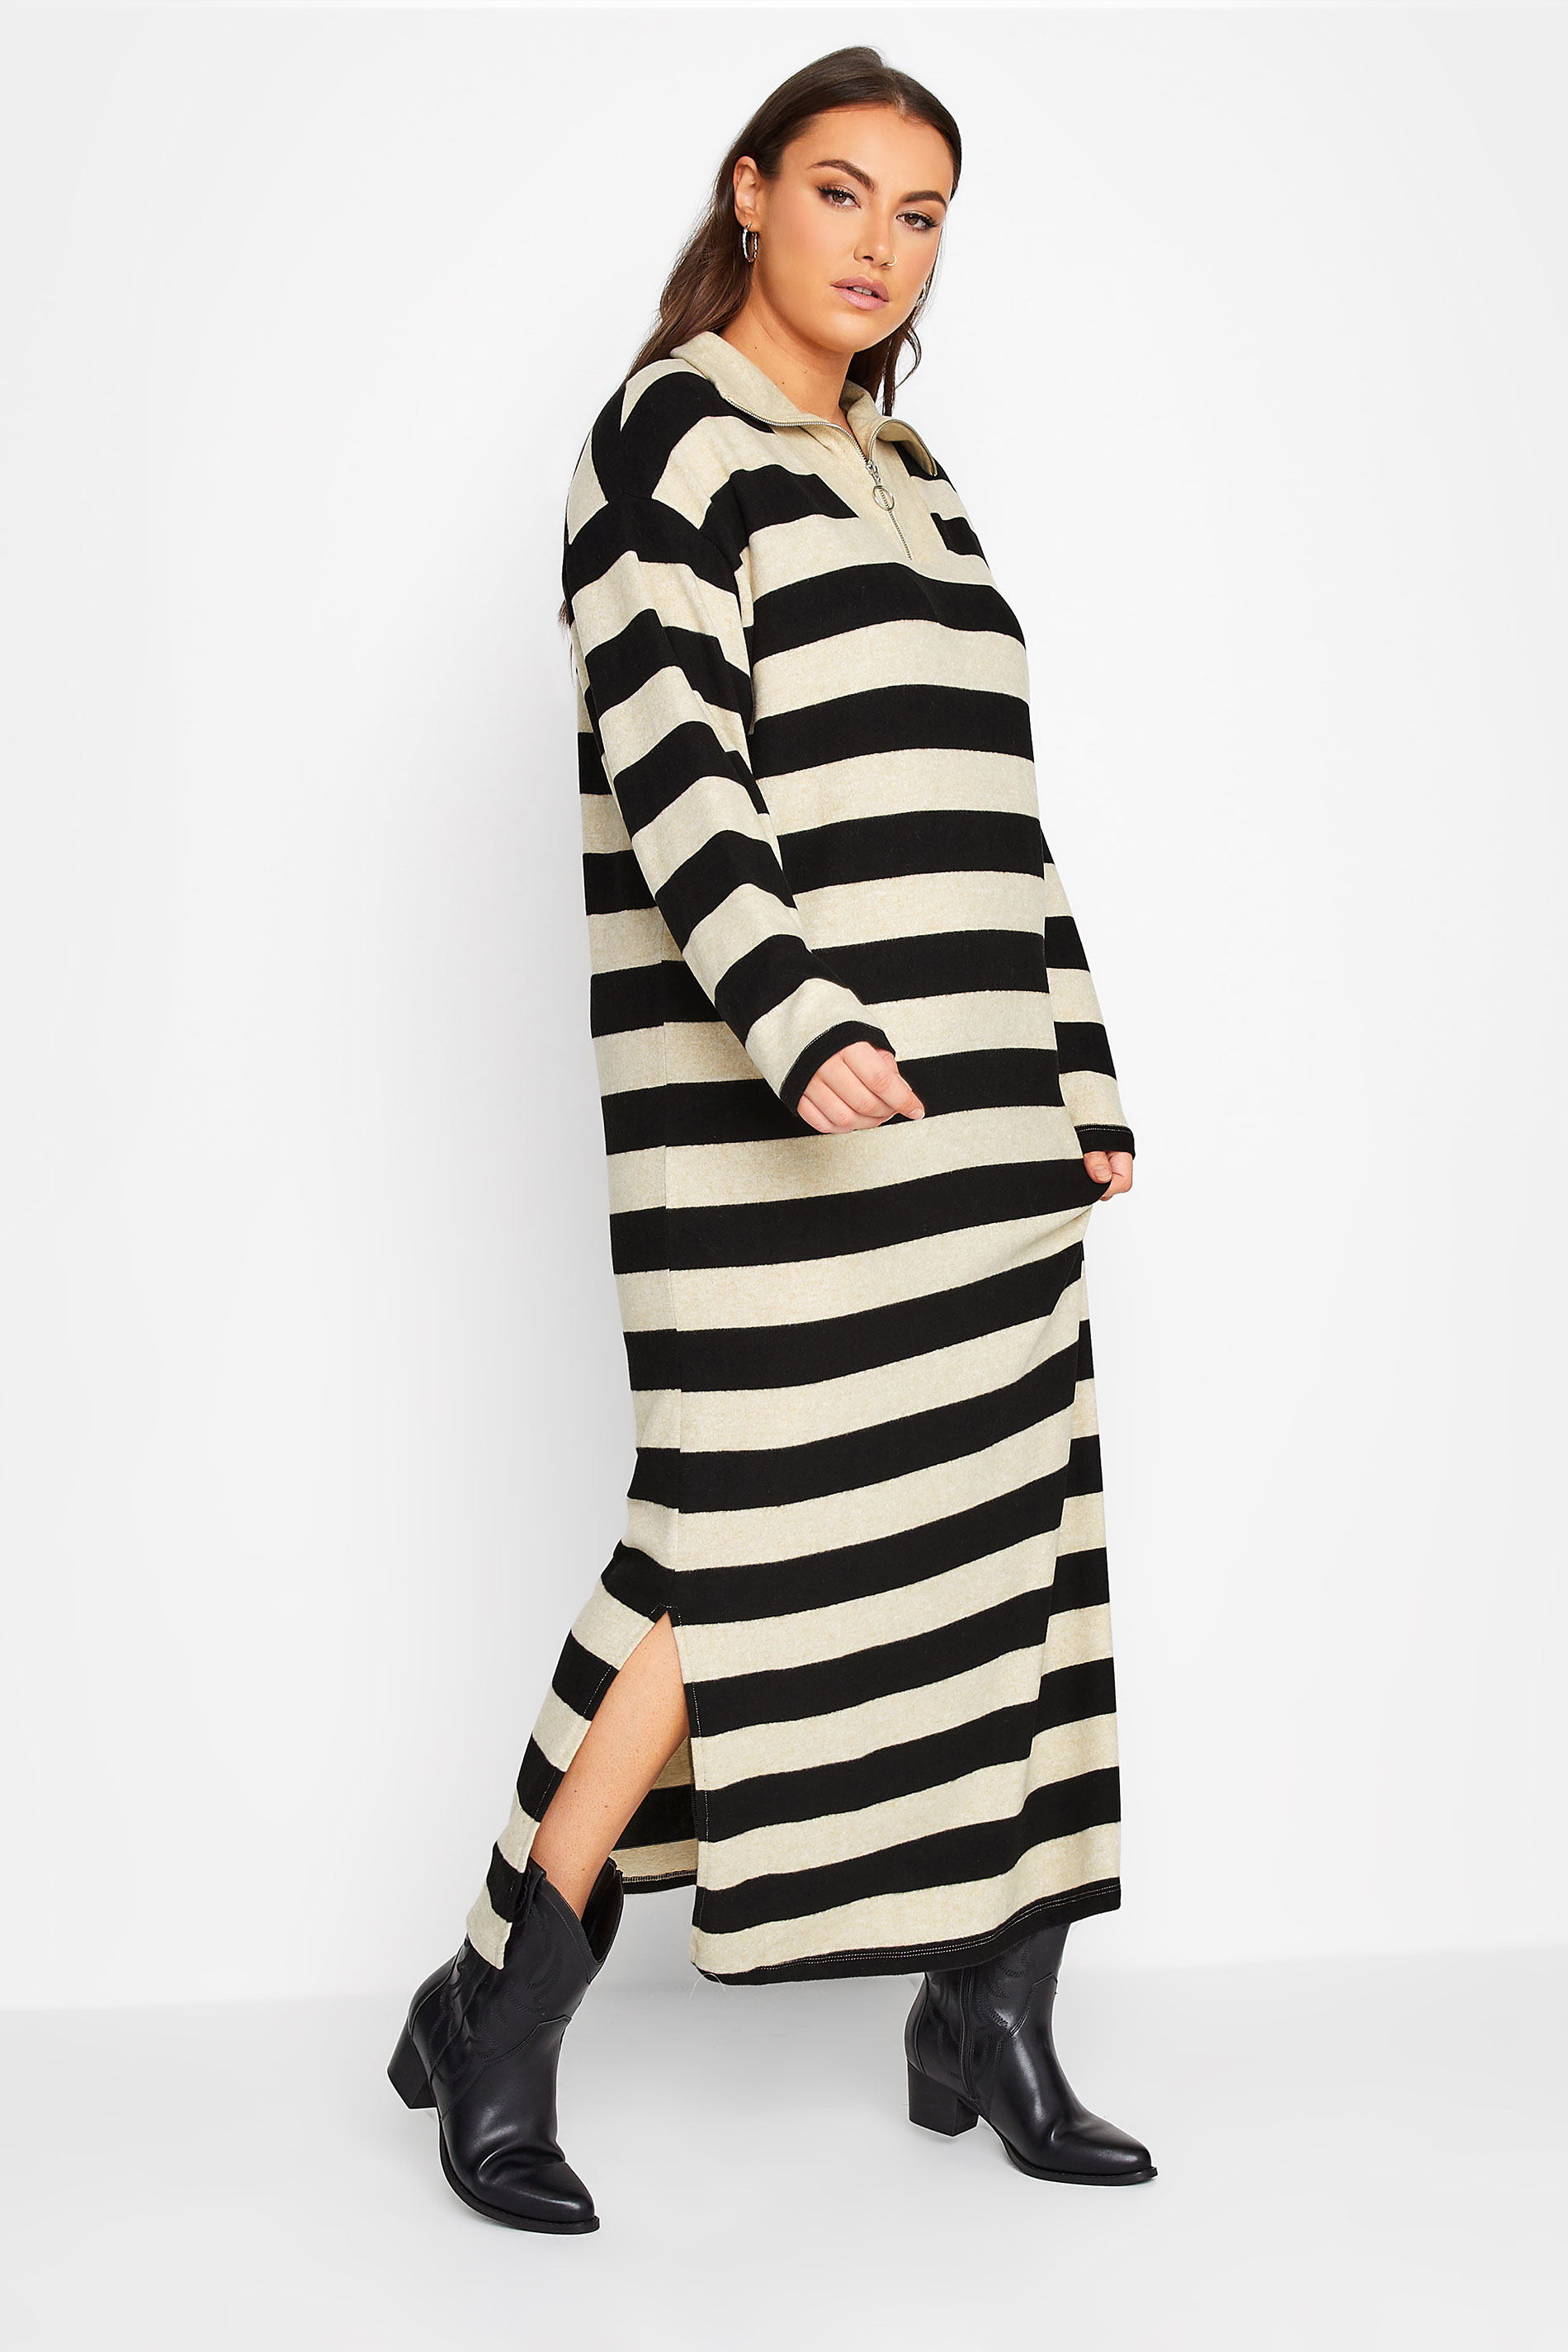 YOURS LUXURY Plus Size Cream & Black Stripe Soft Touch Jumper Dress | Yours Clothing 1